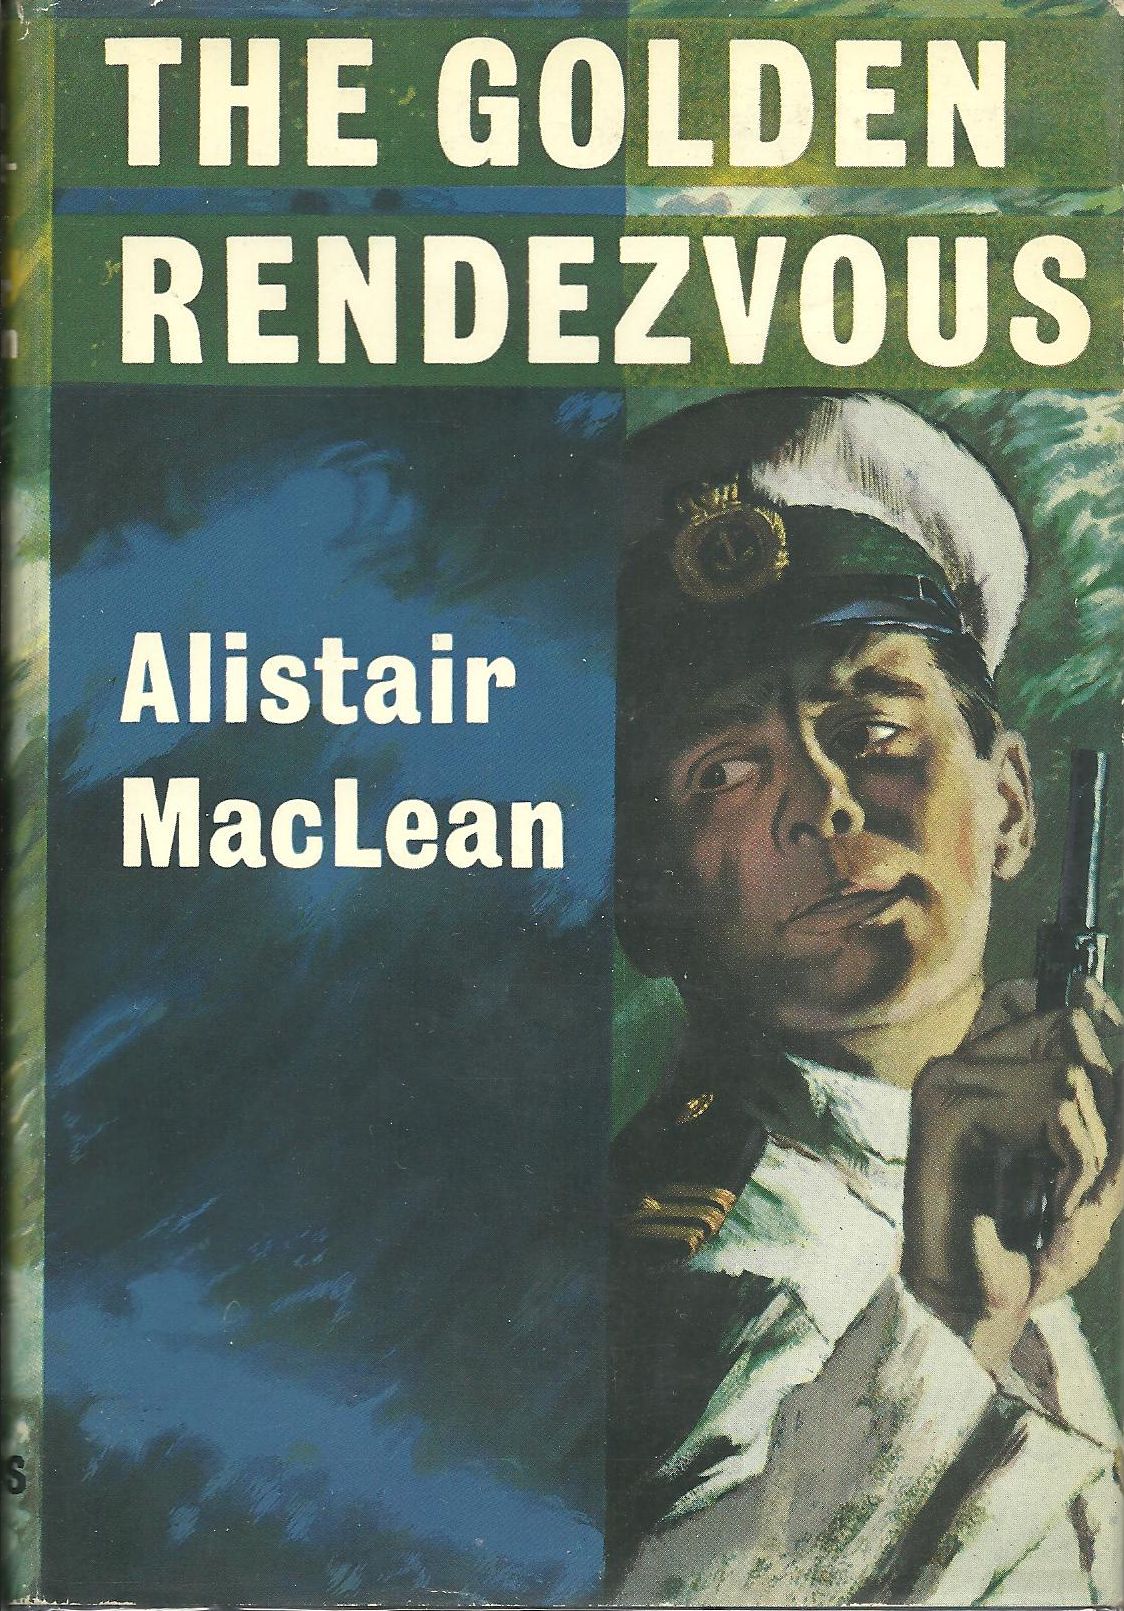 The Golden Rendezvous - UK first edition